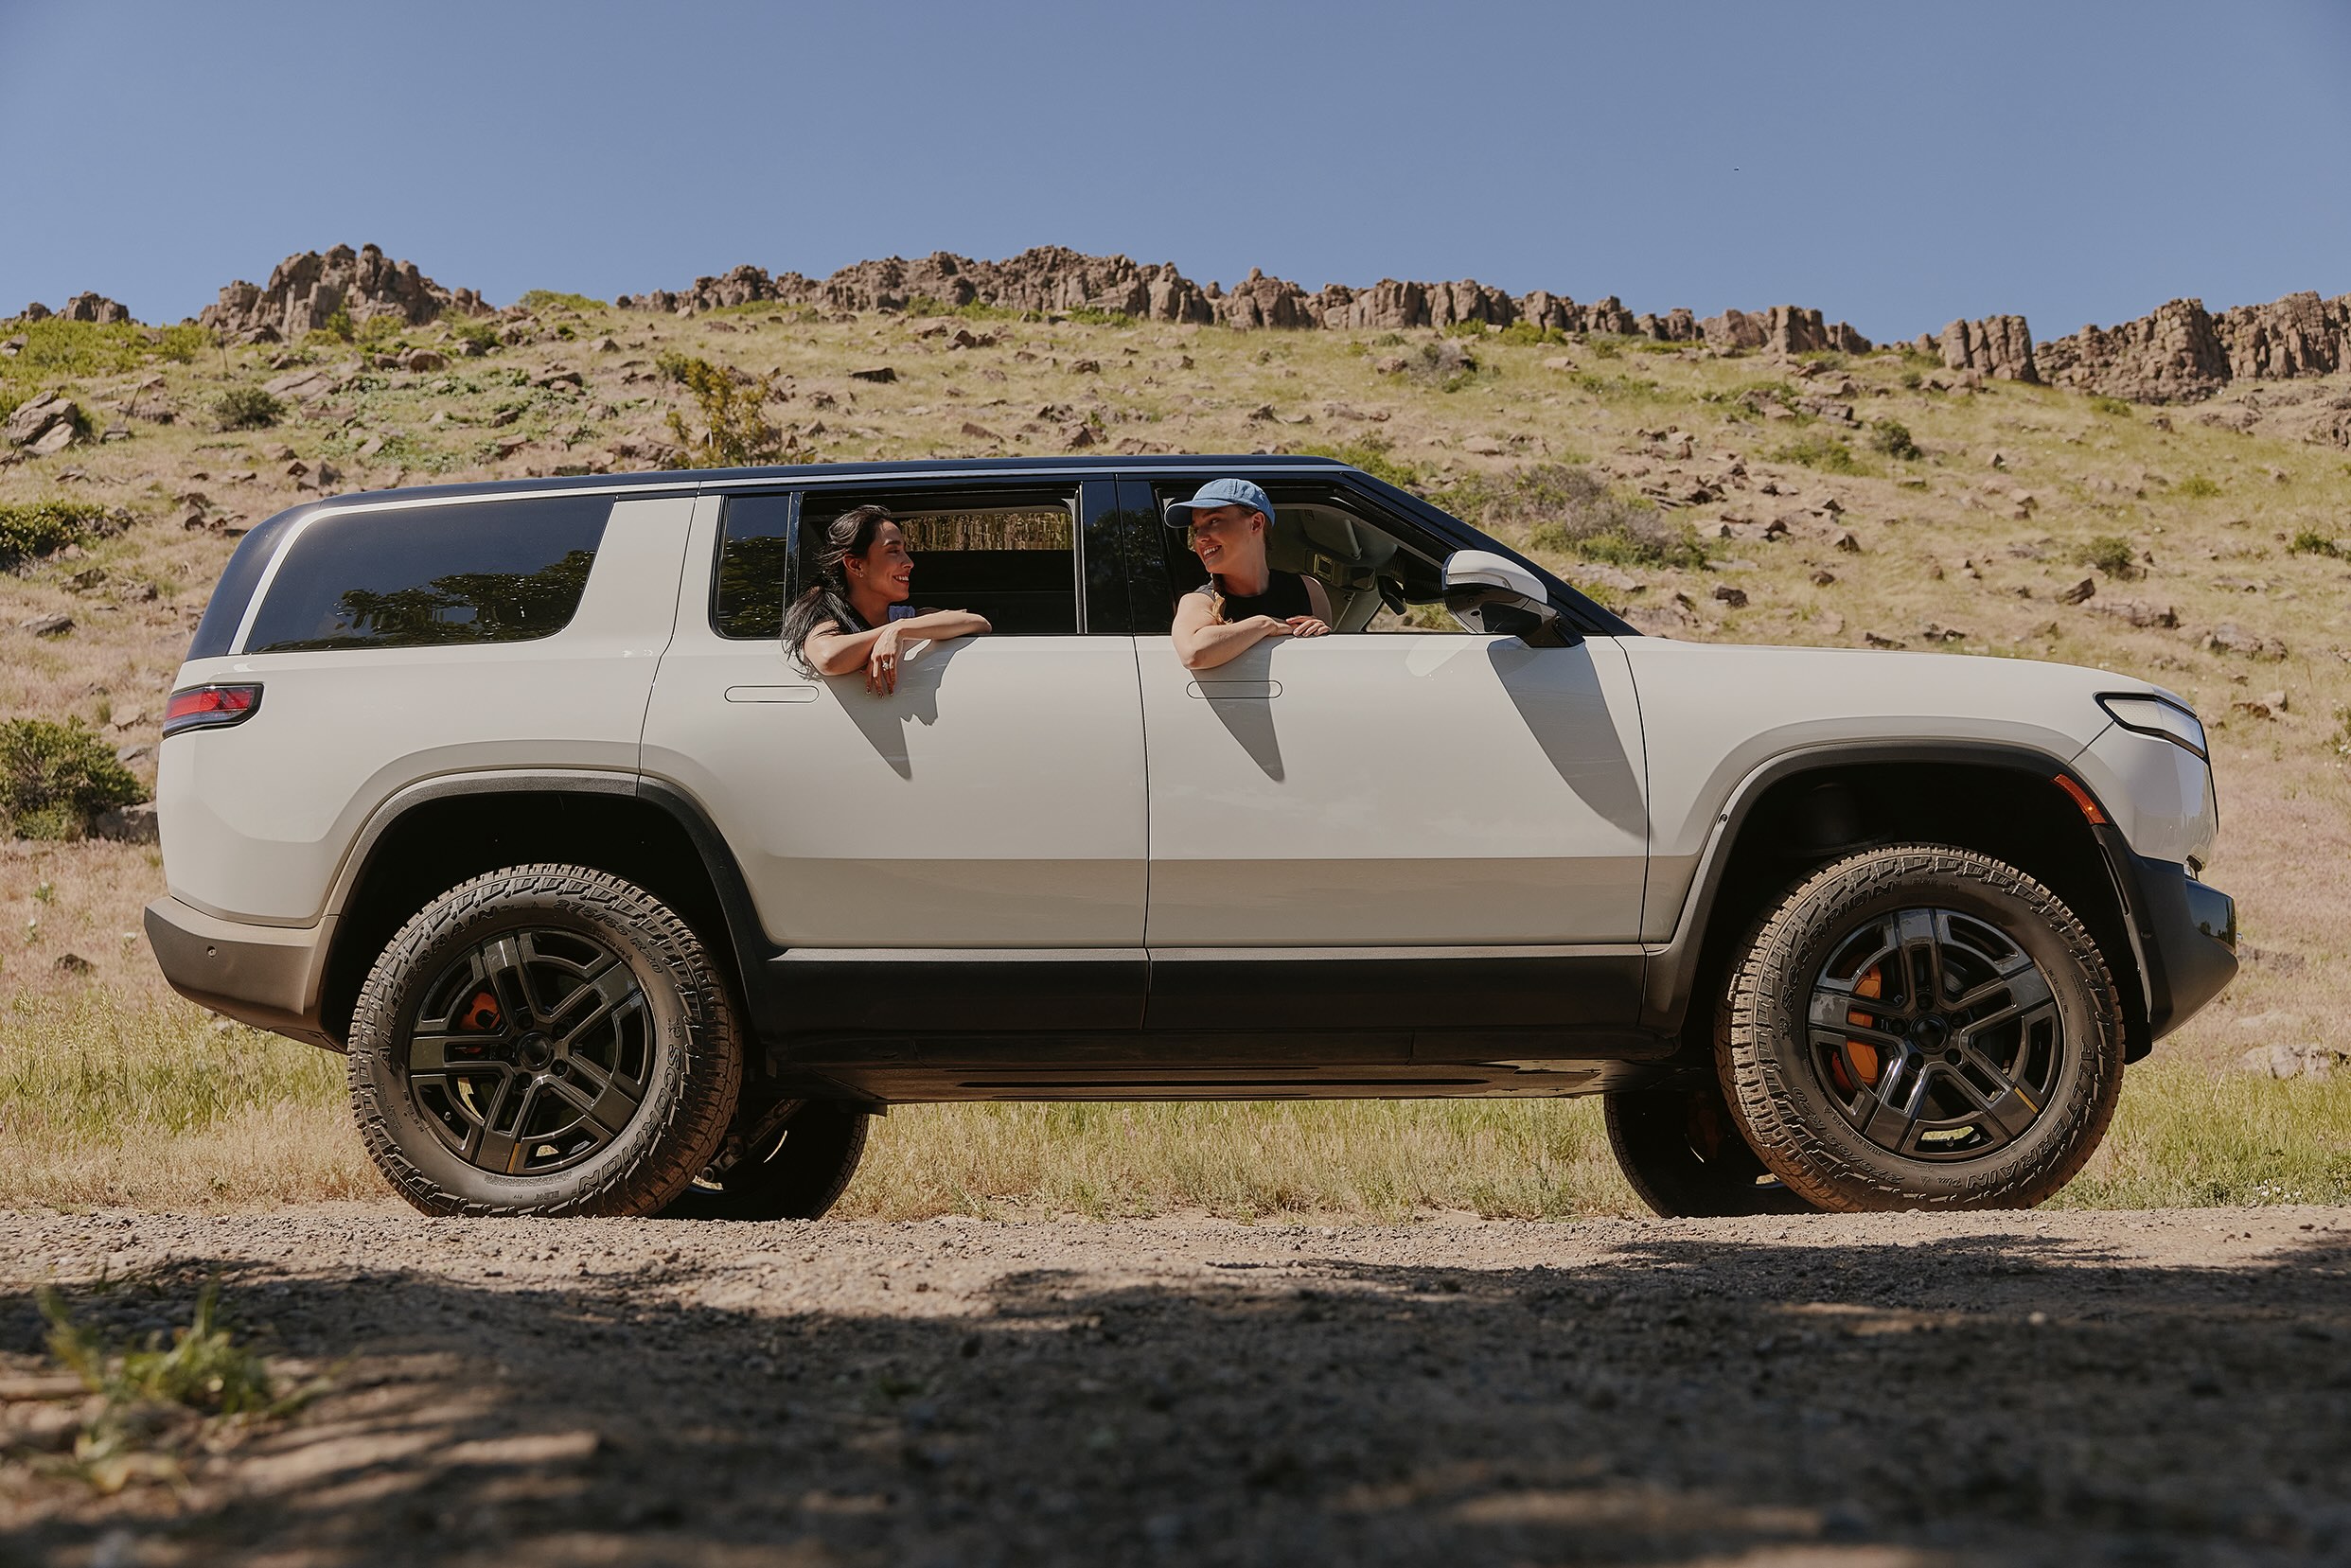 Two people stick their heads out the windows of a SUV on a dirt road with rocky terrain in the background.